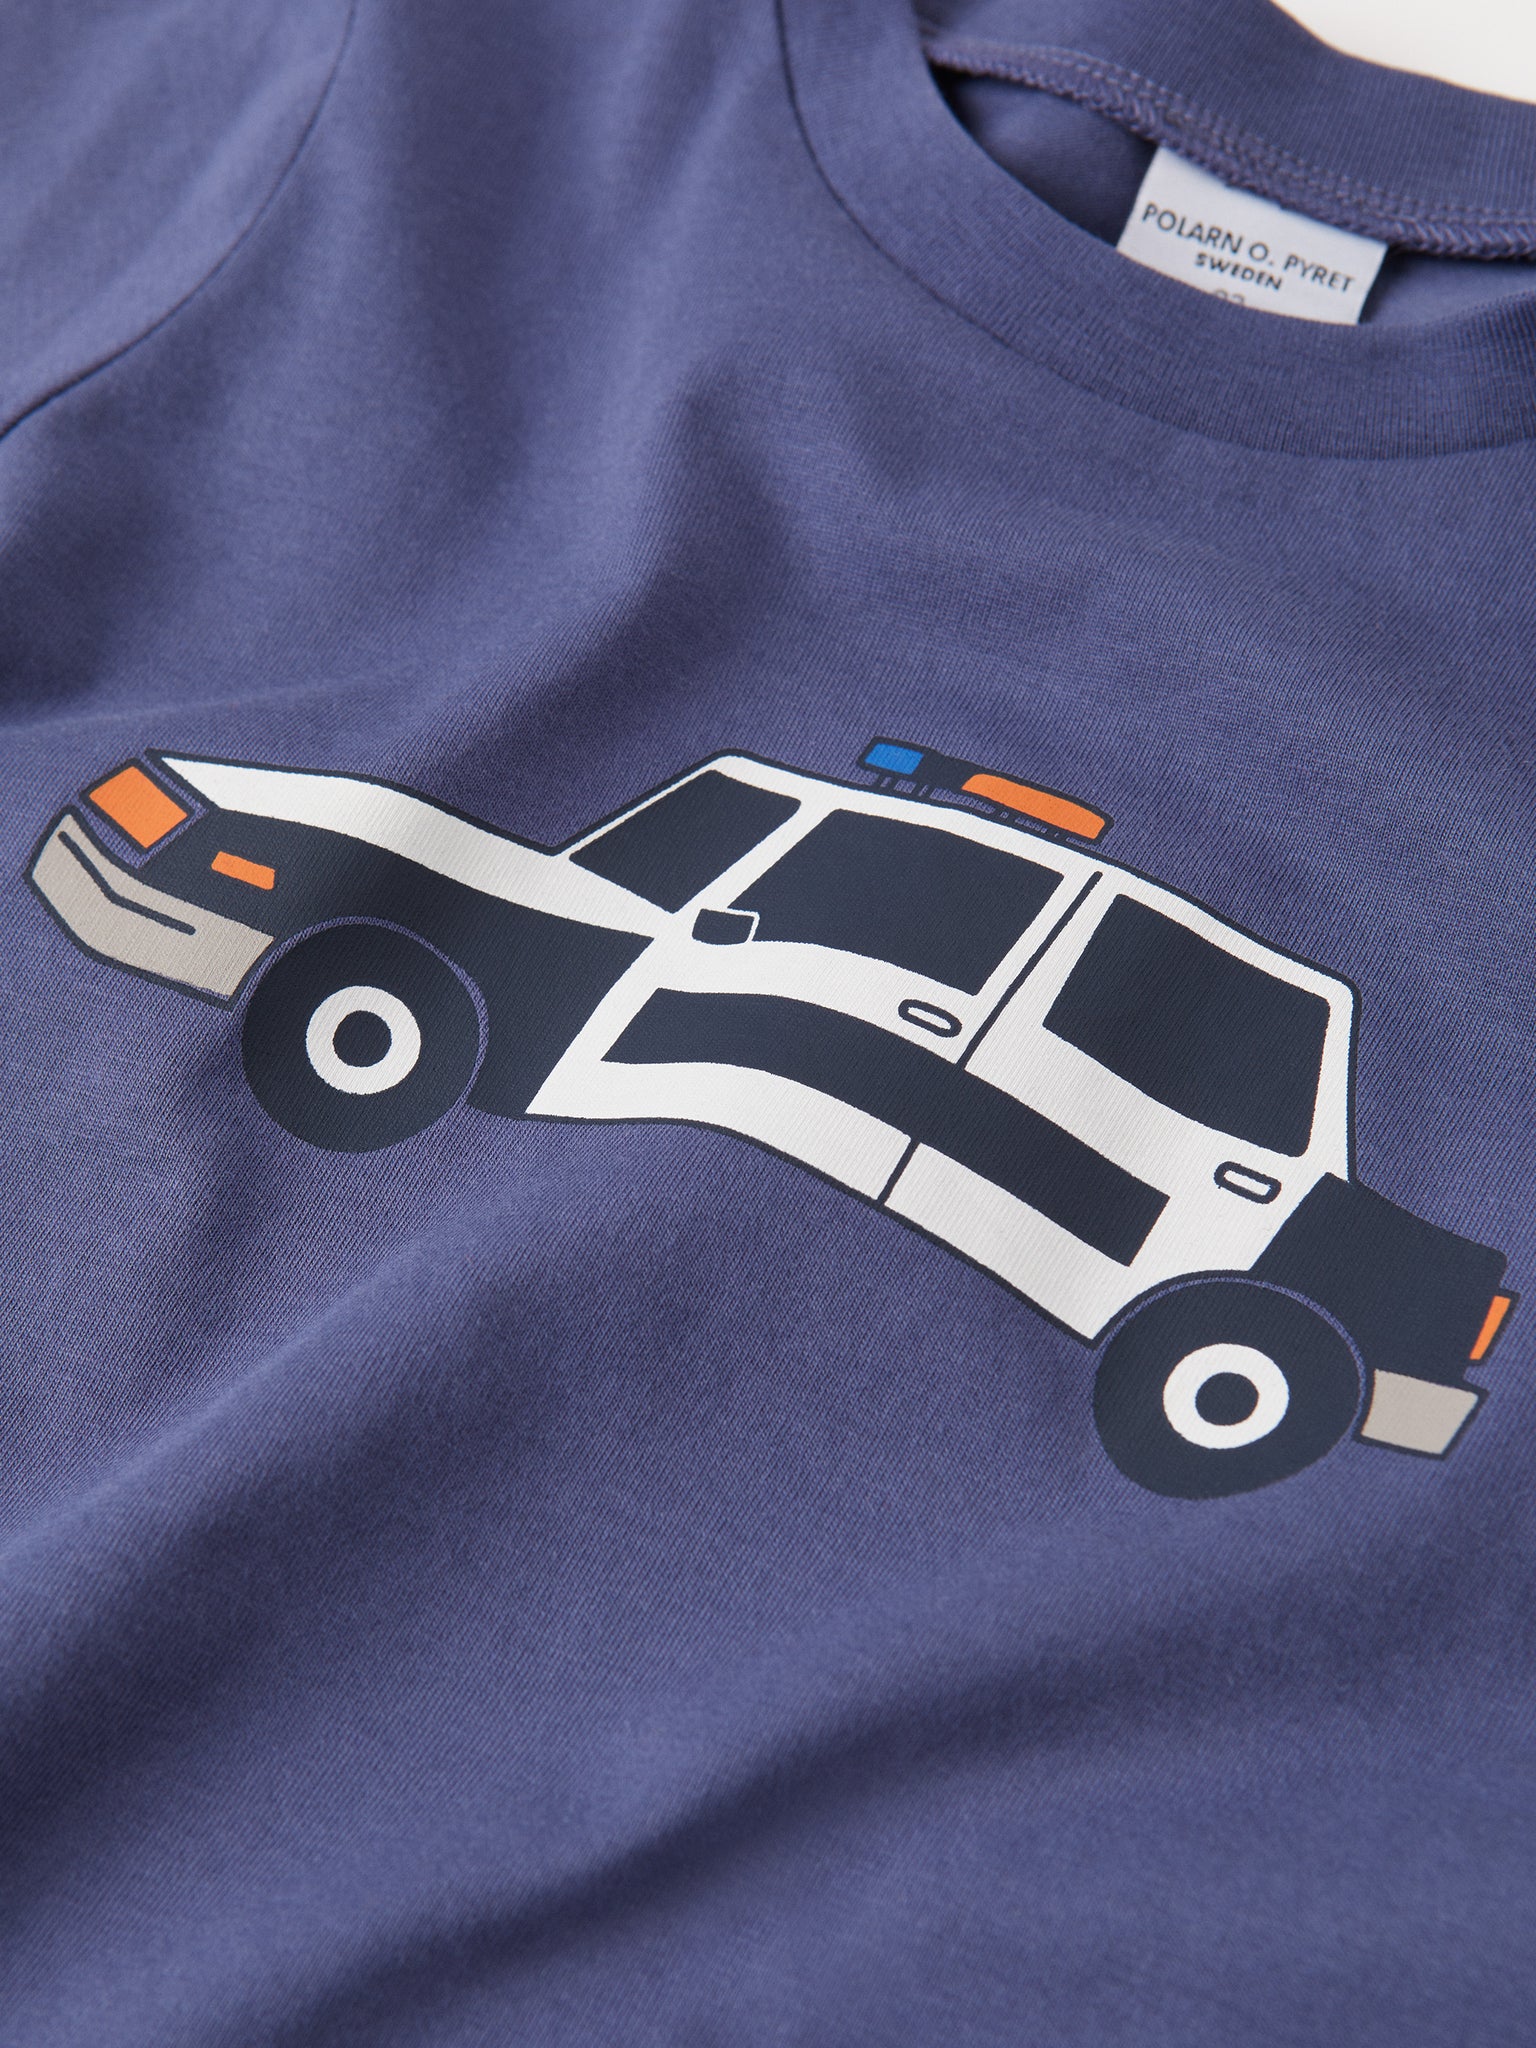 Organic Cotton Kids Police Car T-Shirt from the Polarn O. Pyret kidswear collection. Ethically produced kids clothing.